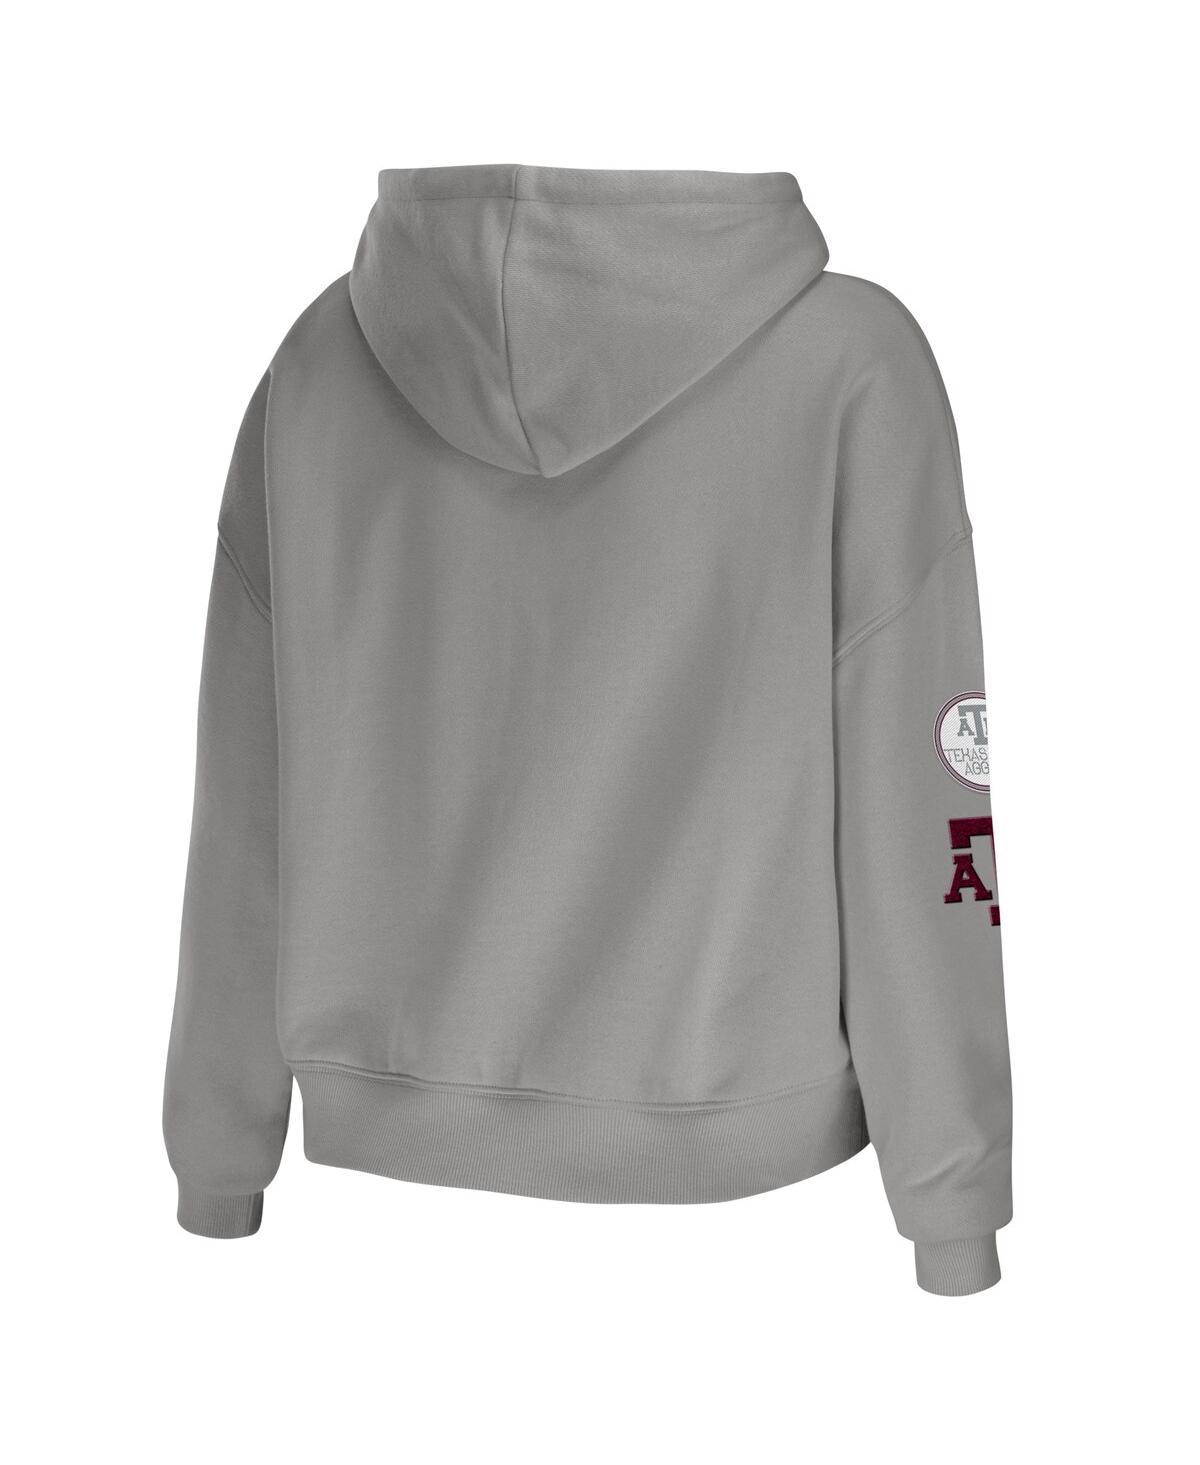 Shop Wear By Erin Andrews Women's  Gray Texas A&m Aggies Mixed Media Cropped Pullover Hoodie